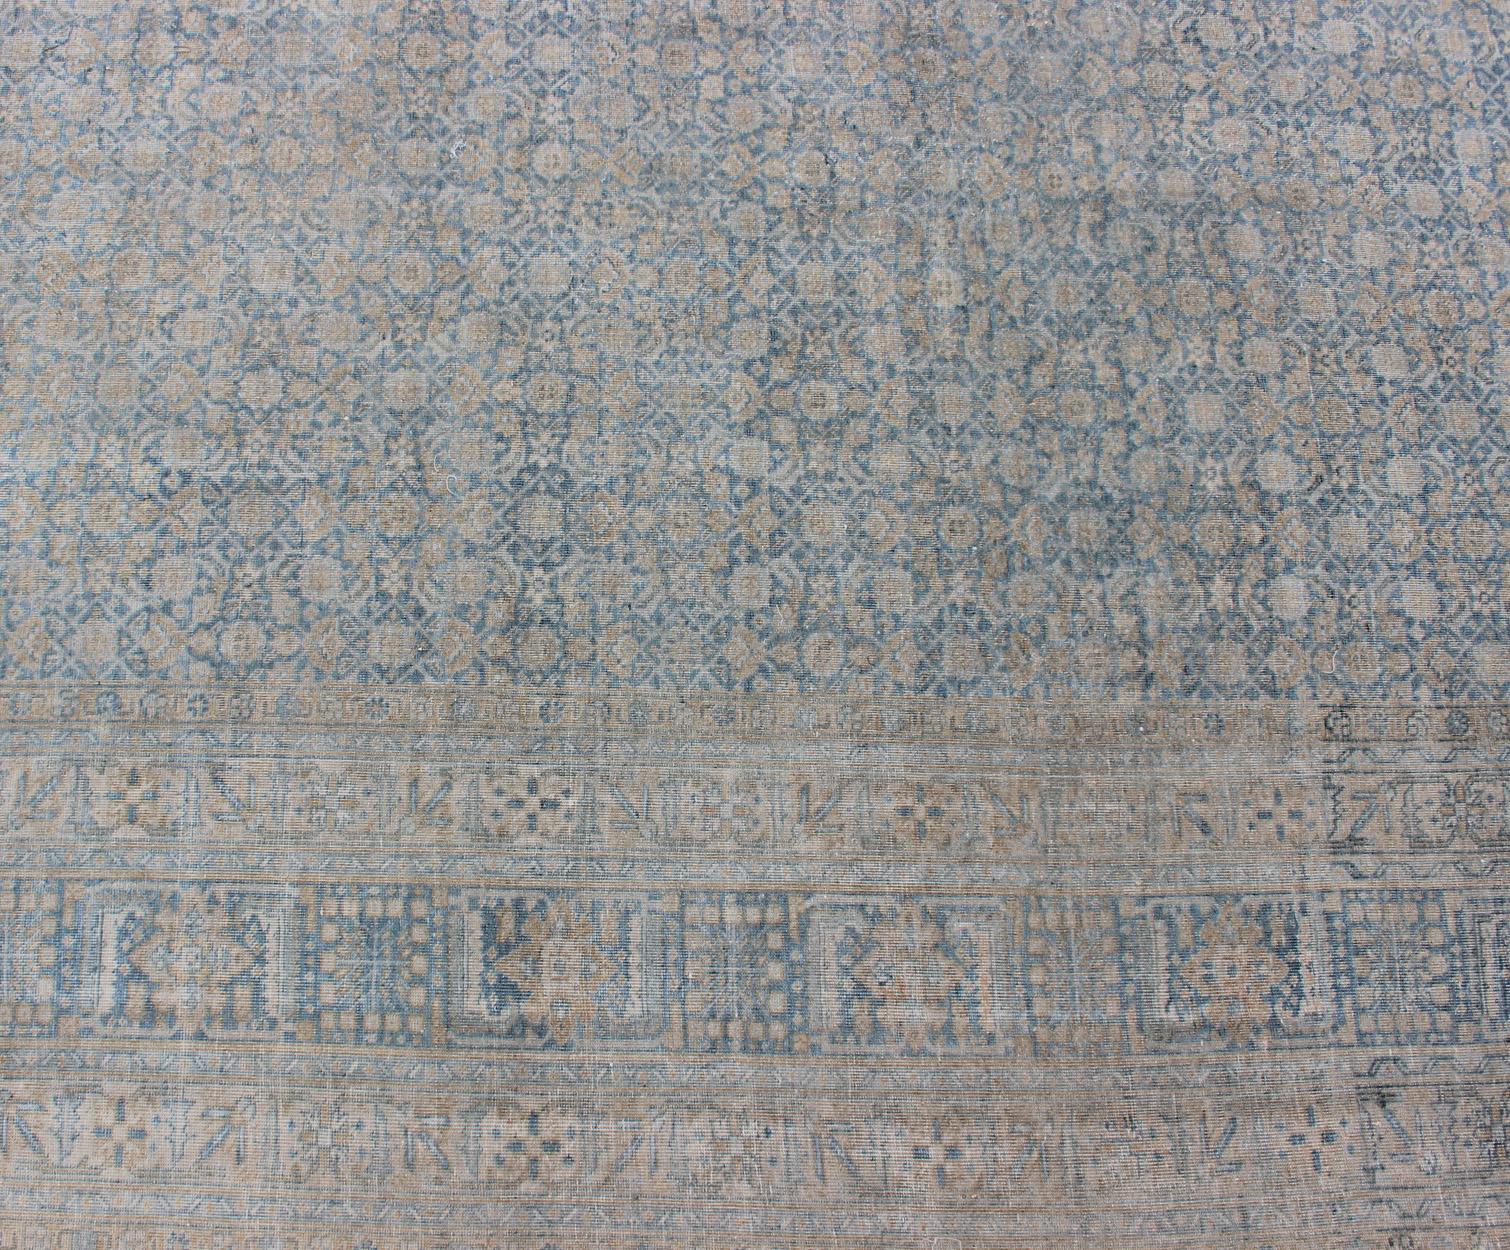 Large Antique Persian Tabriz Rug in All-Over Herati in Shades of Blue and Tan  For Sale 3